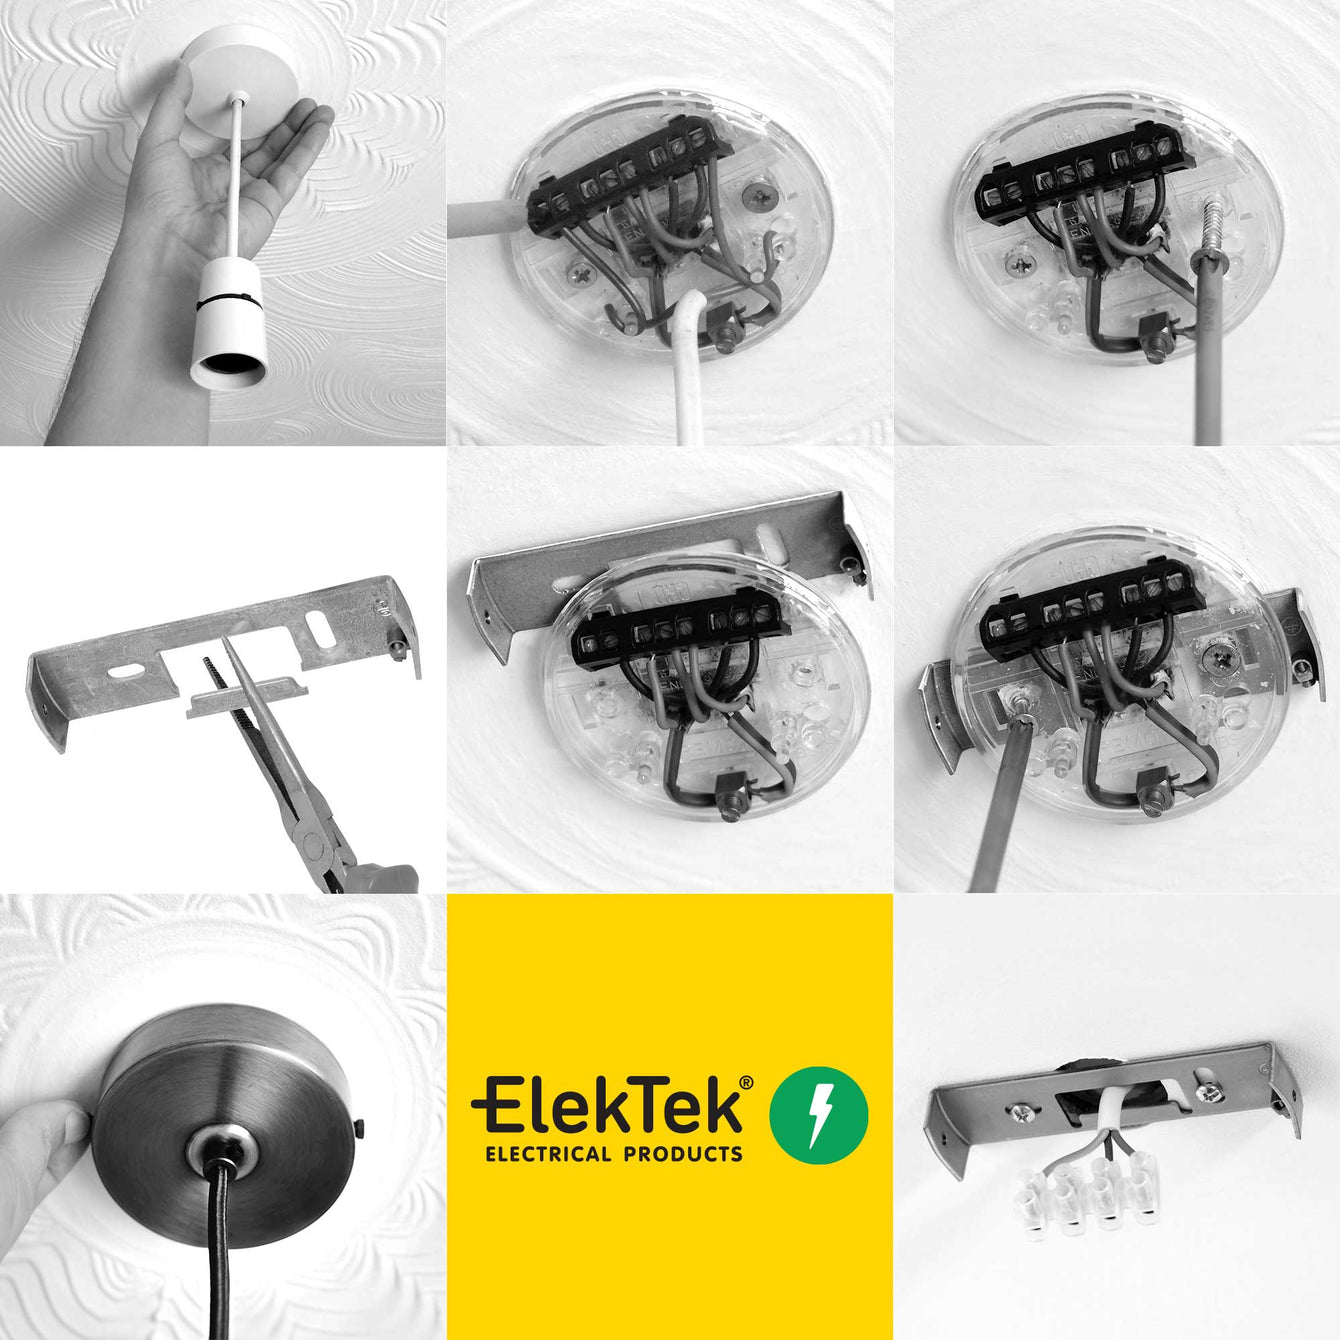 ElekTek 100mm Diameter Convex Ceiling Rose with Strap Bracket and Hook Metallic and Powder Coated Finishes Antique Copper